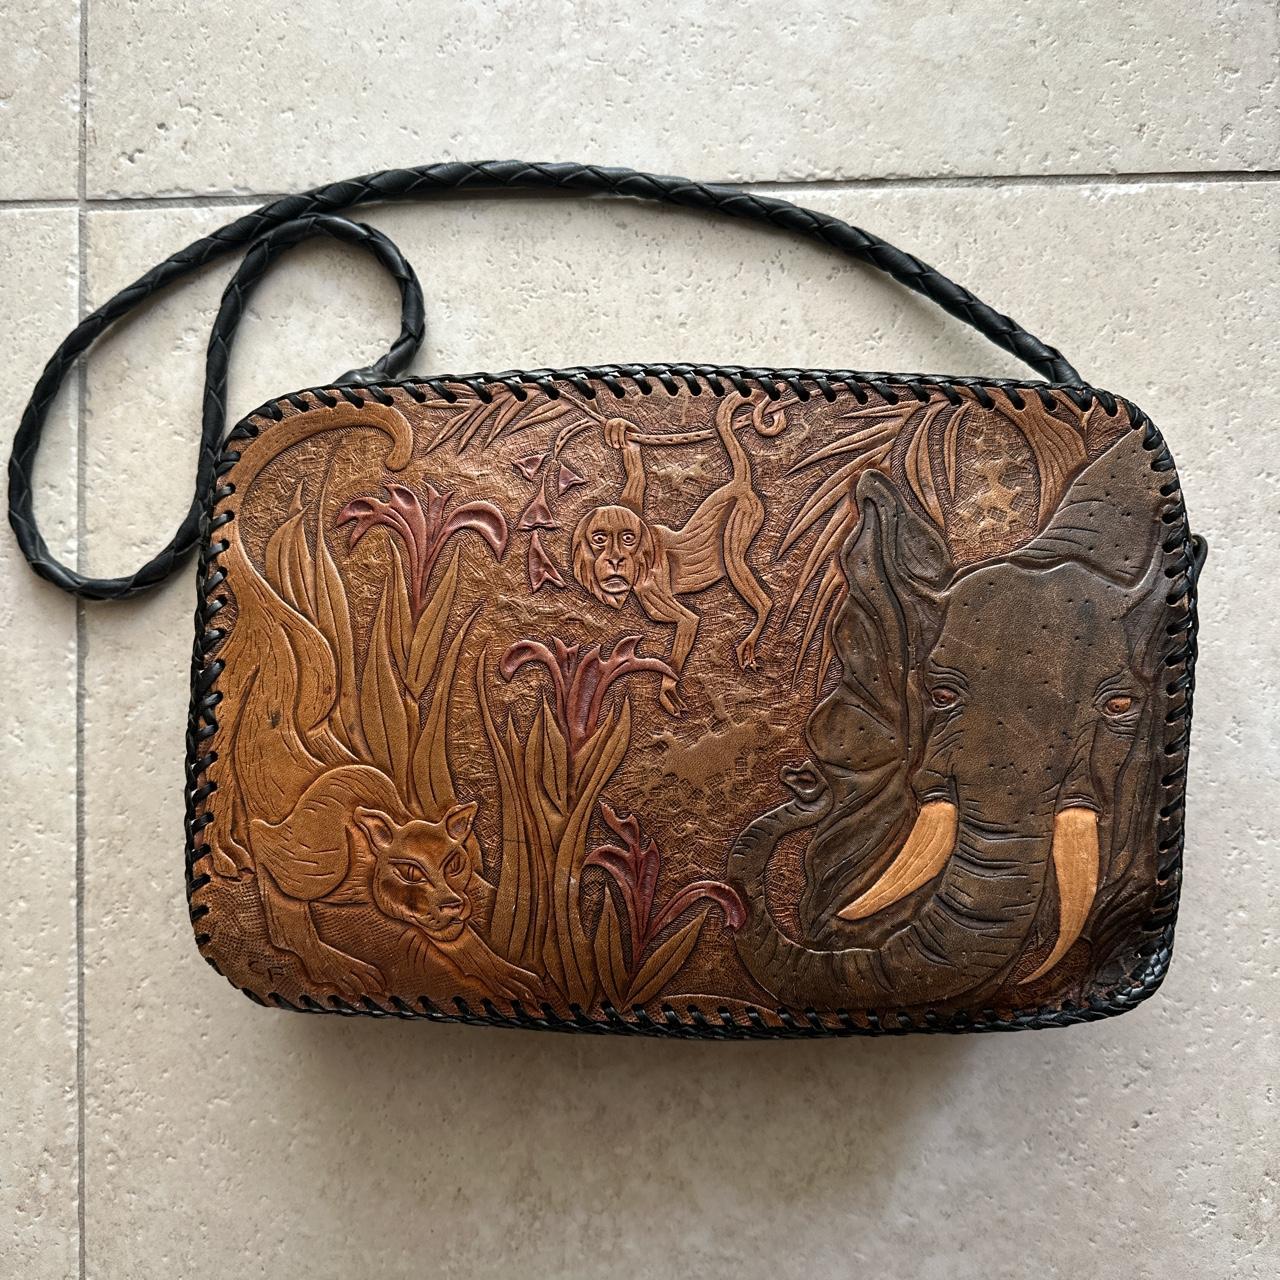 Pretty Penny Clothing - Vintage tooled leather purse with horse detail.  Saddle closurewith metal. Adjustable tooled leather strap with brass +  stone detail. Good vintage condition total length with strap “29” height